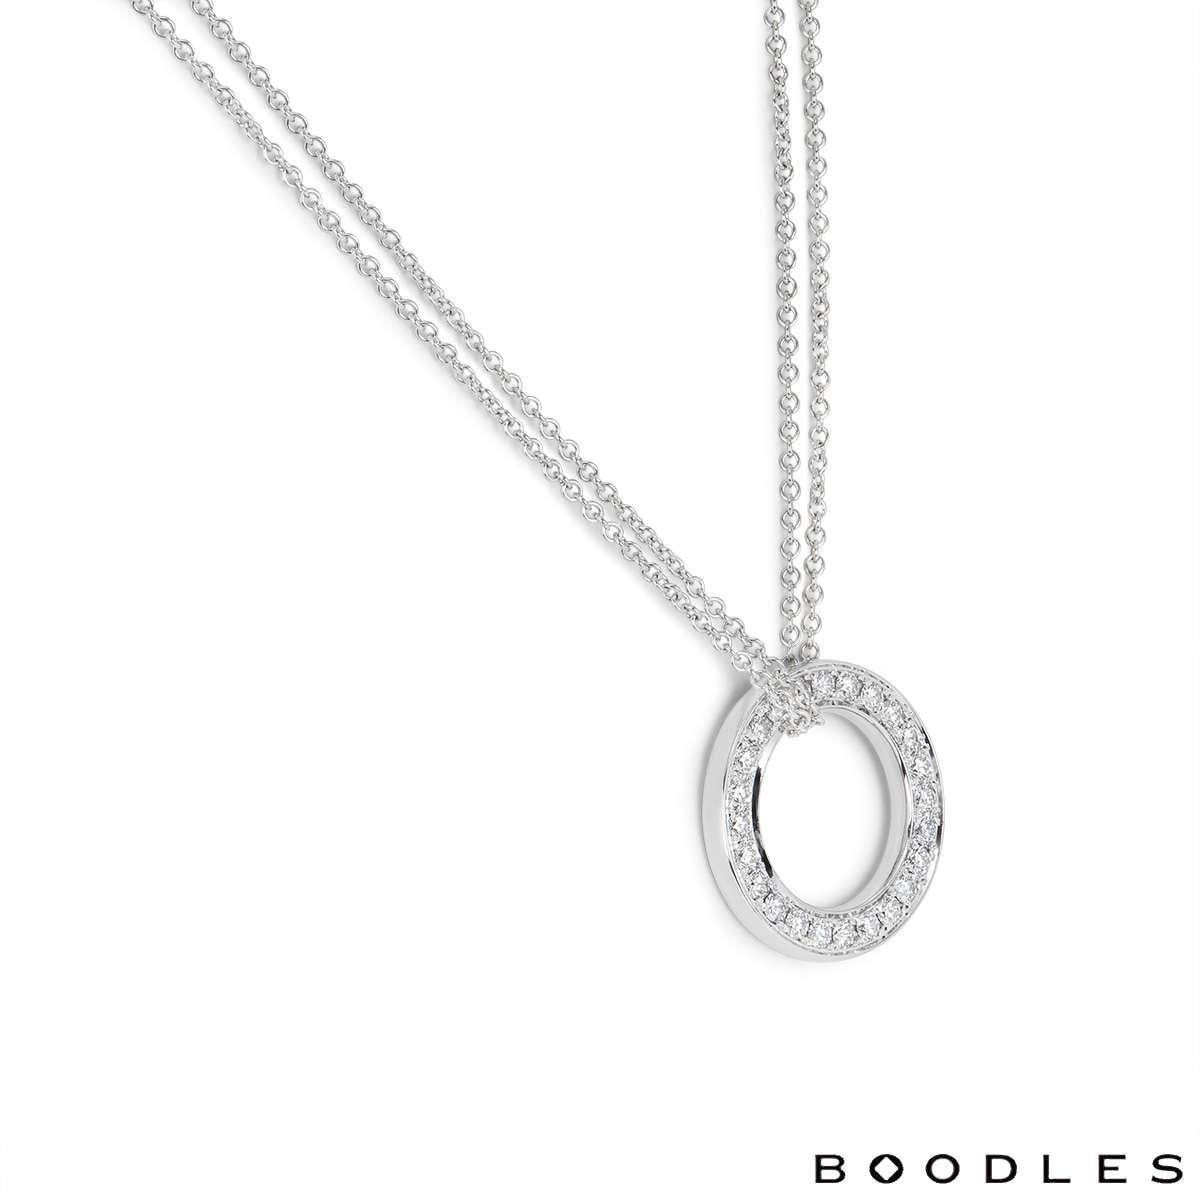 A classic diamond pendant in 18k white gold from the Roulette collection by Boodles. The circular openwork pendant is set with round brilliant cut diamonds to both sides, totalling approximately 2.50ct. The pendant measures 2.4mm in diameter and